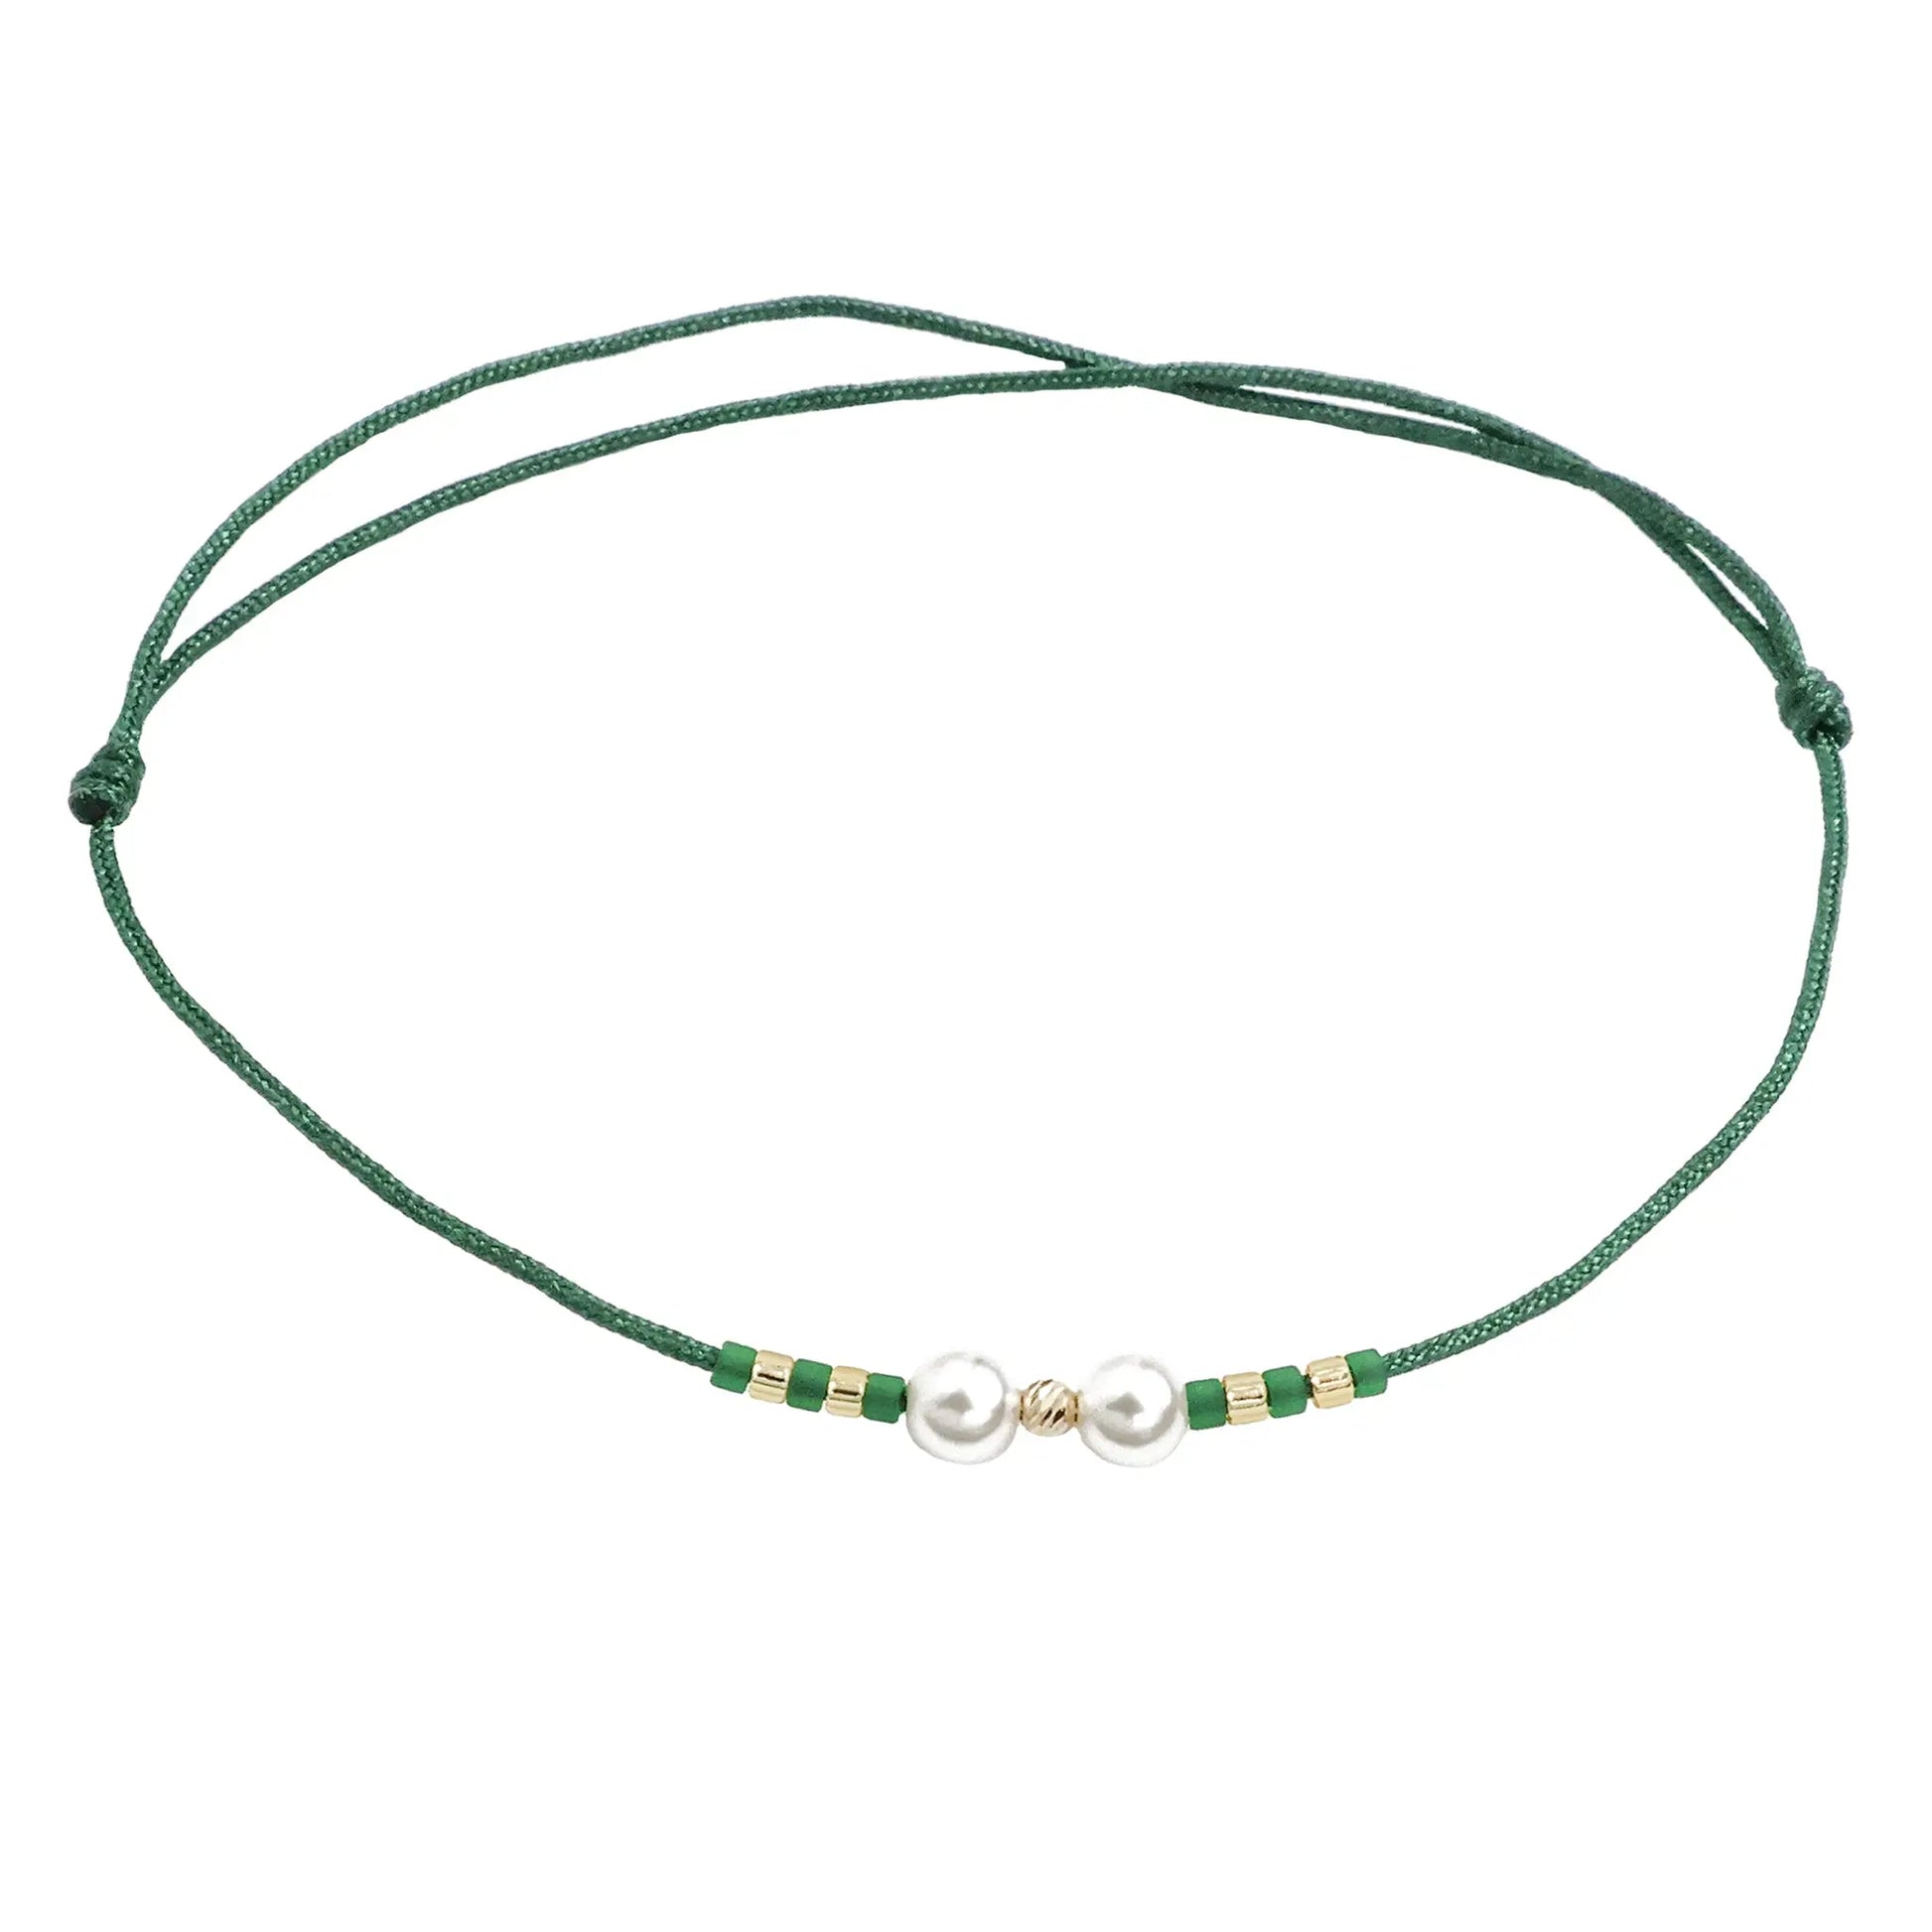 Bracelet with 1 bead of 14K solid gold, Miyuki beads and 2 artificial pearls-green Vega Lopez